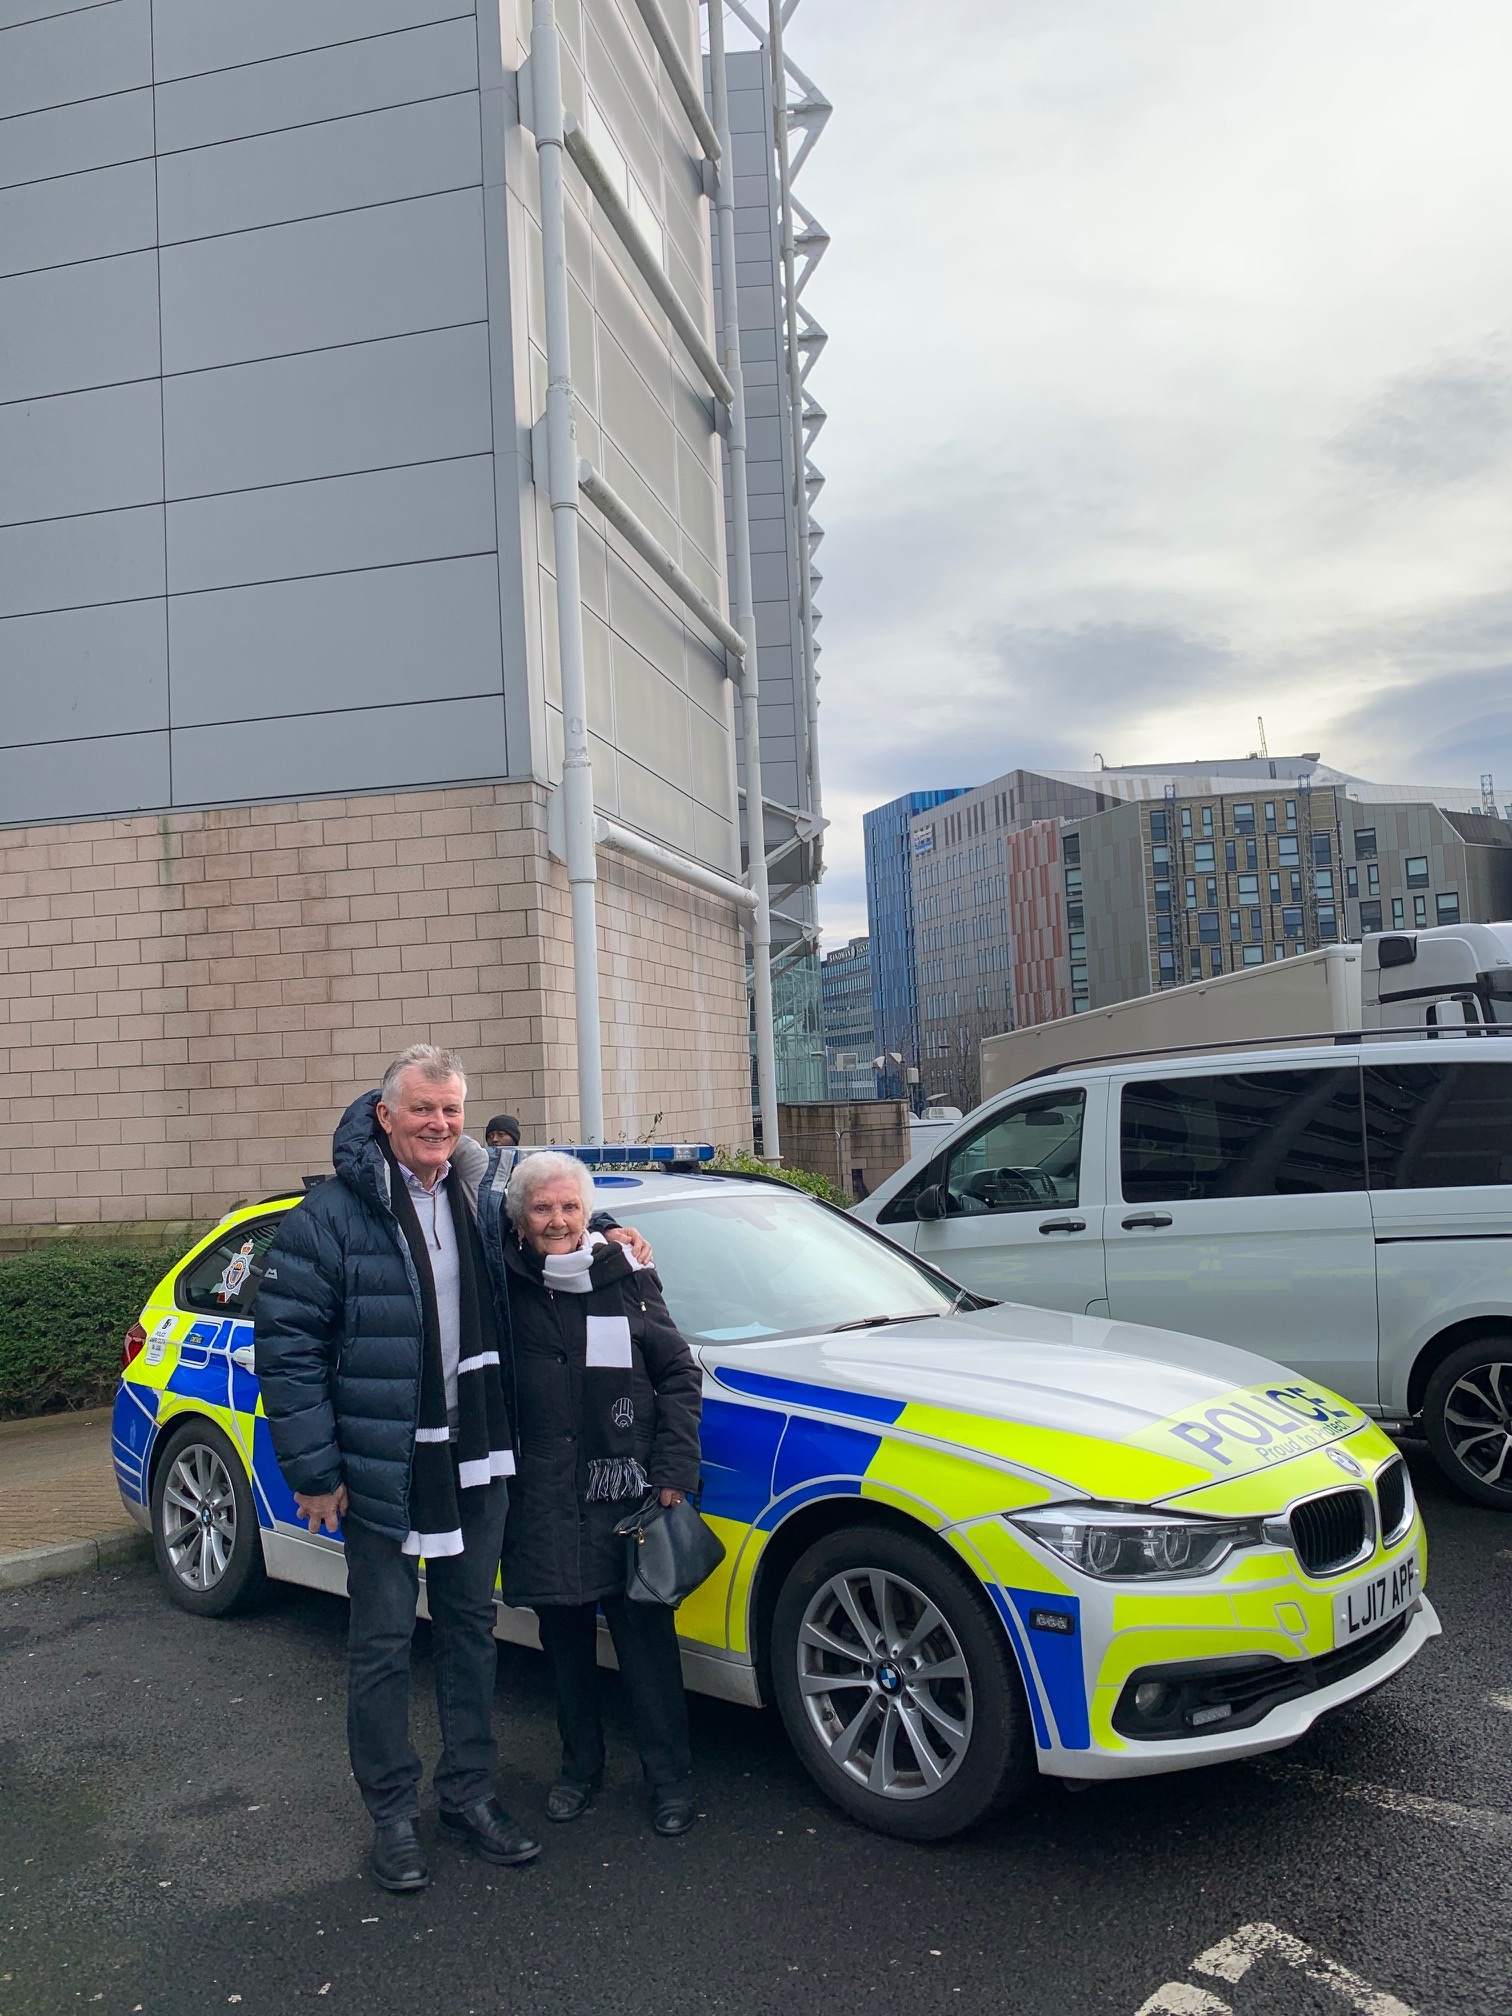 Florence Rudd, a lifelong Newcastle fan, stands next to a police car